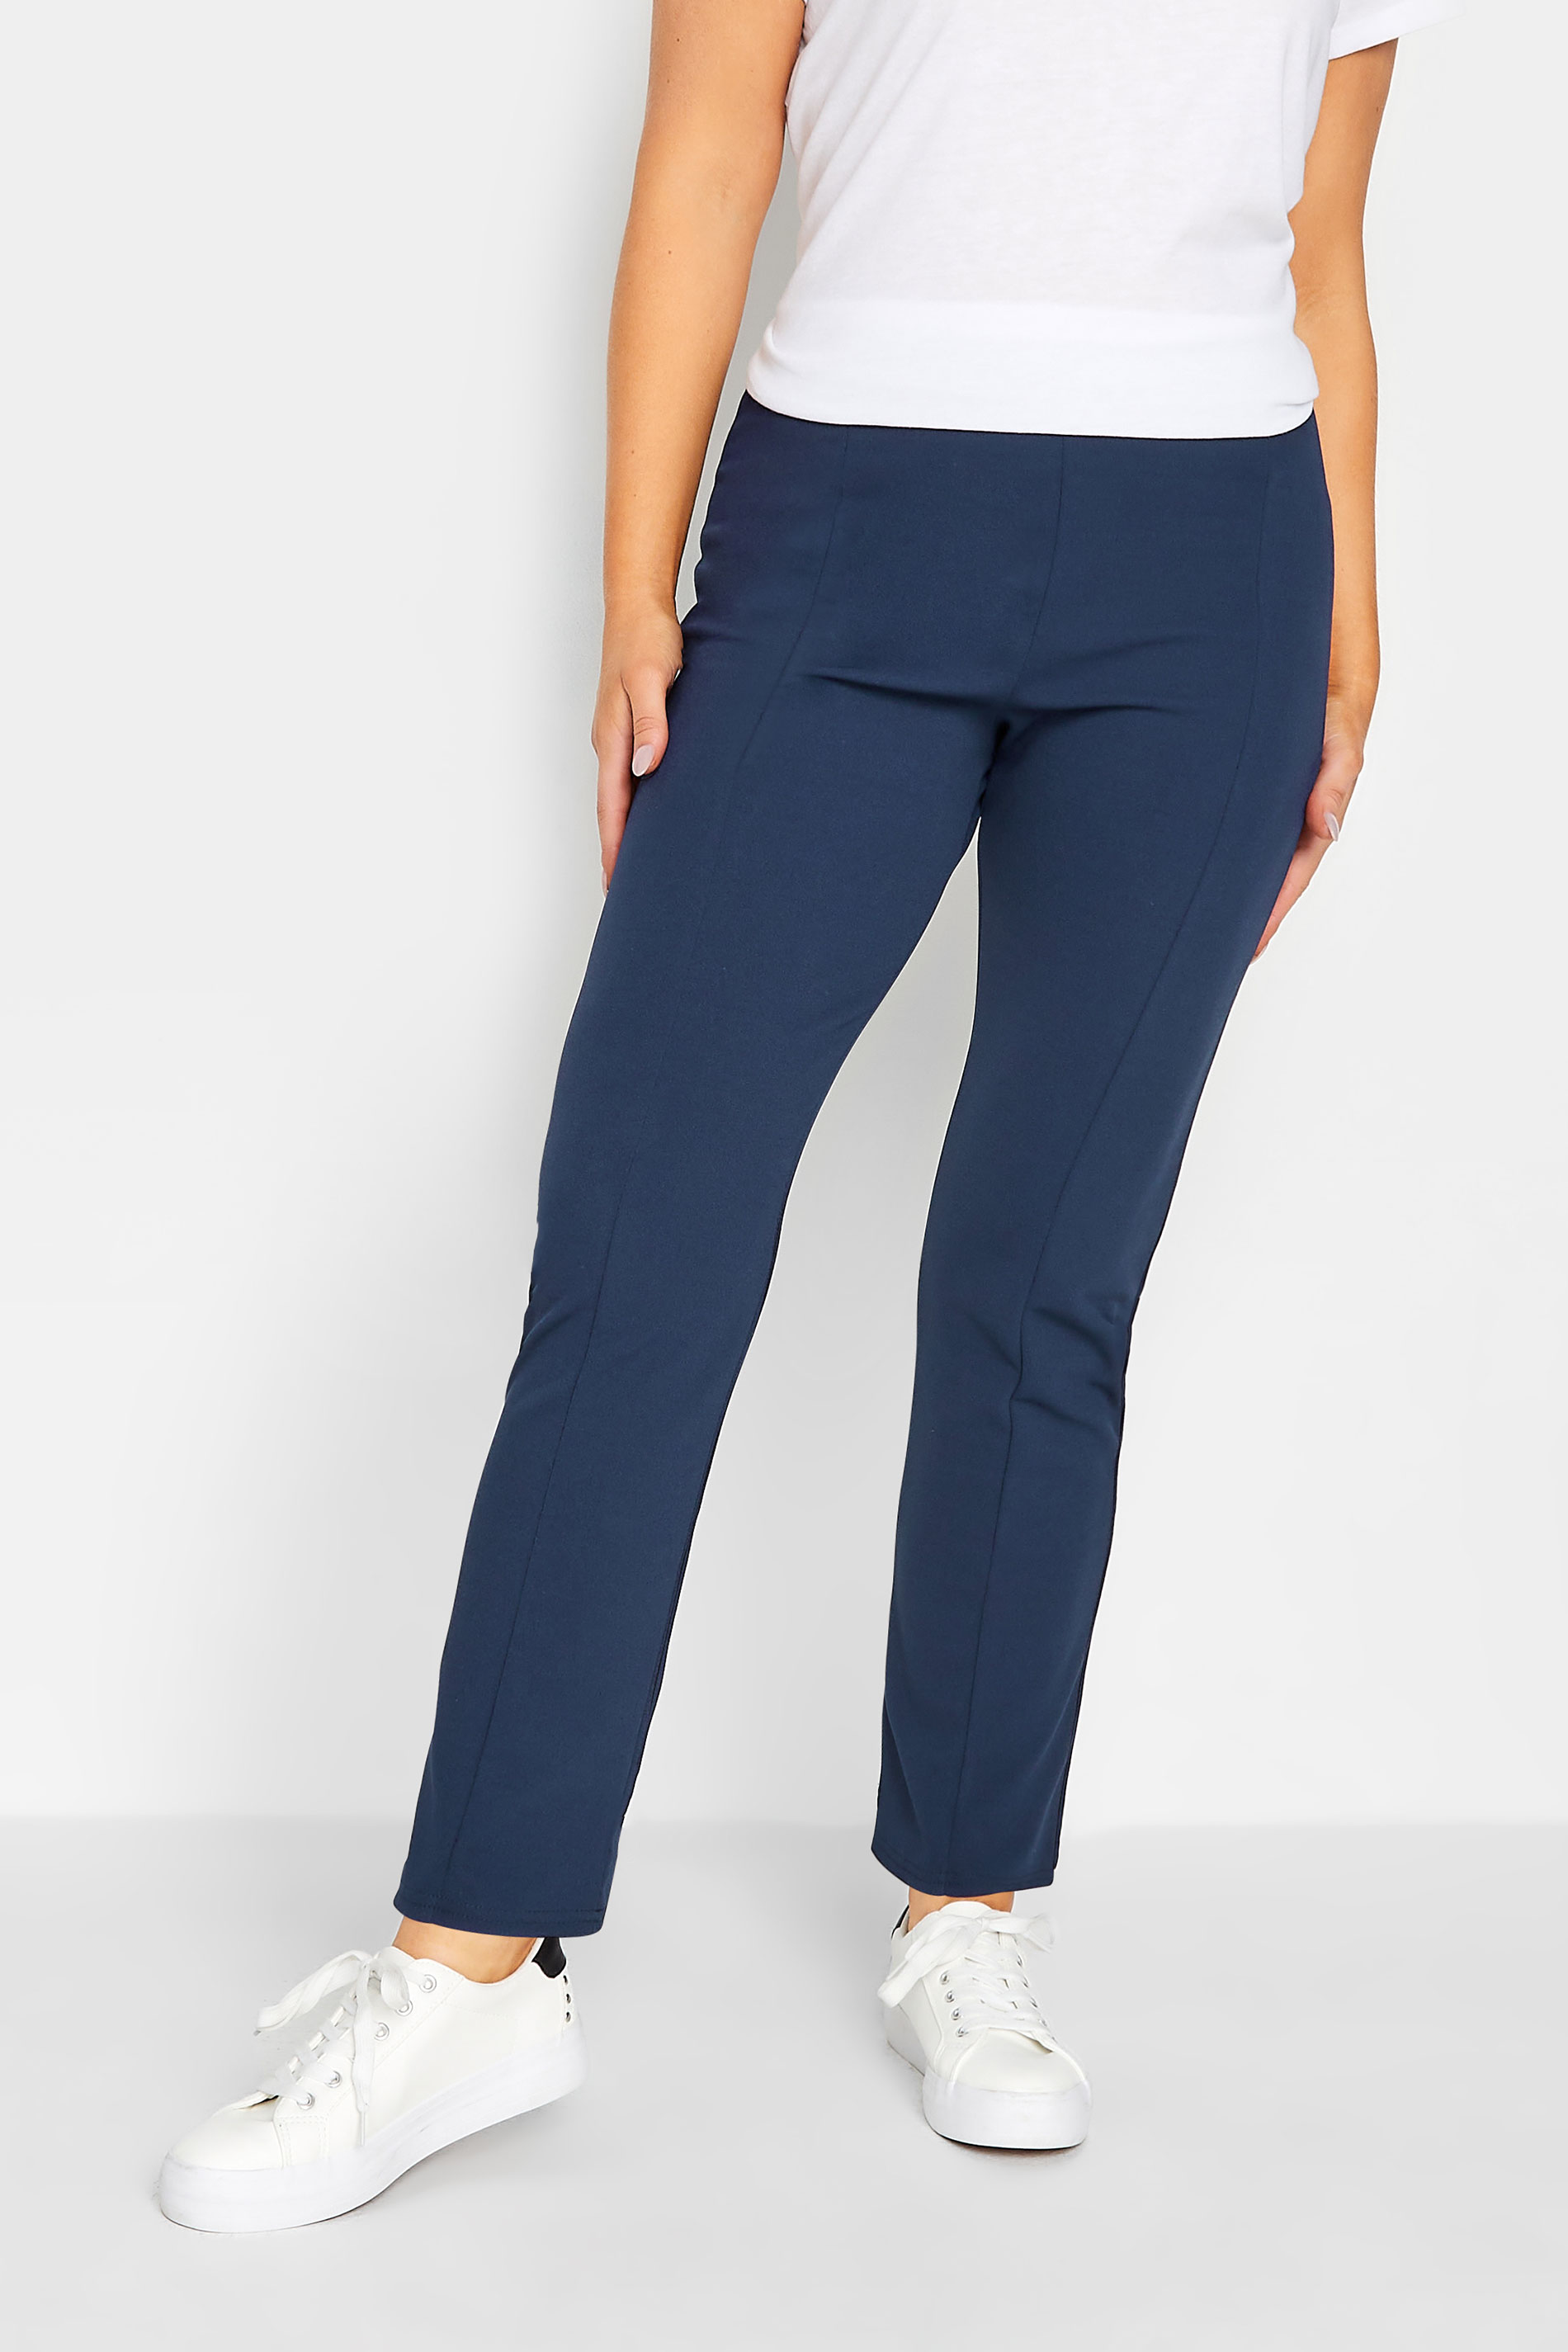 ASOS DESIGN smart tapered linen mix trousers in navy  ASOS